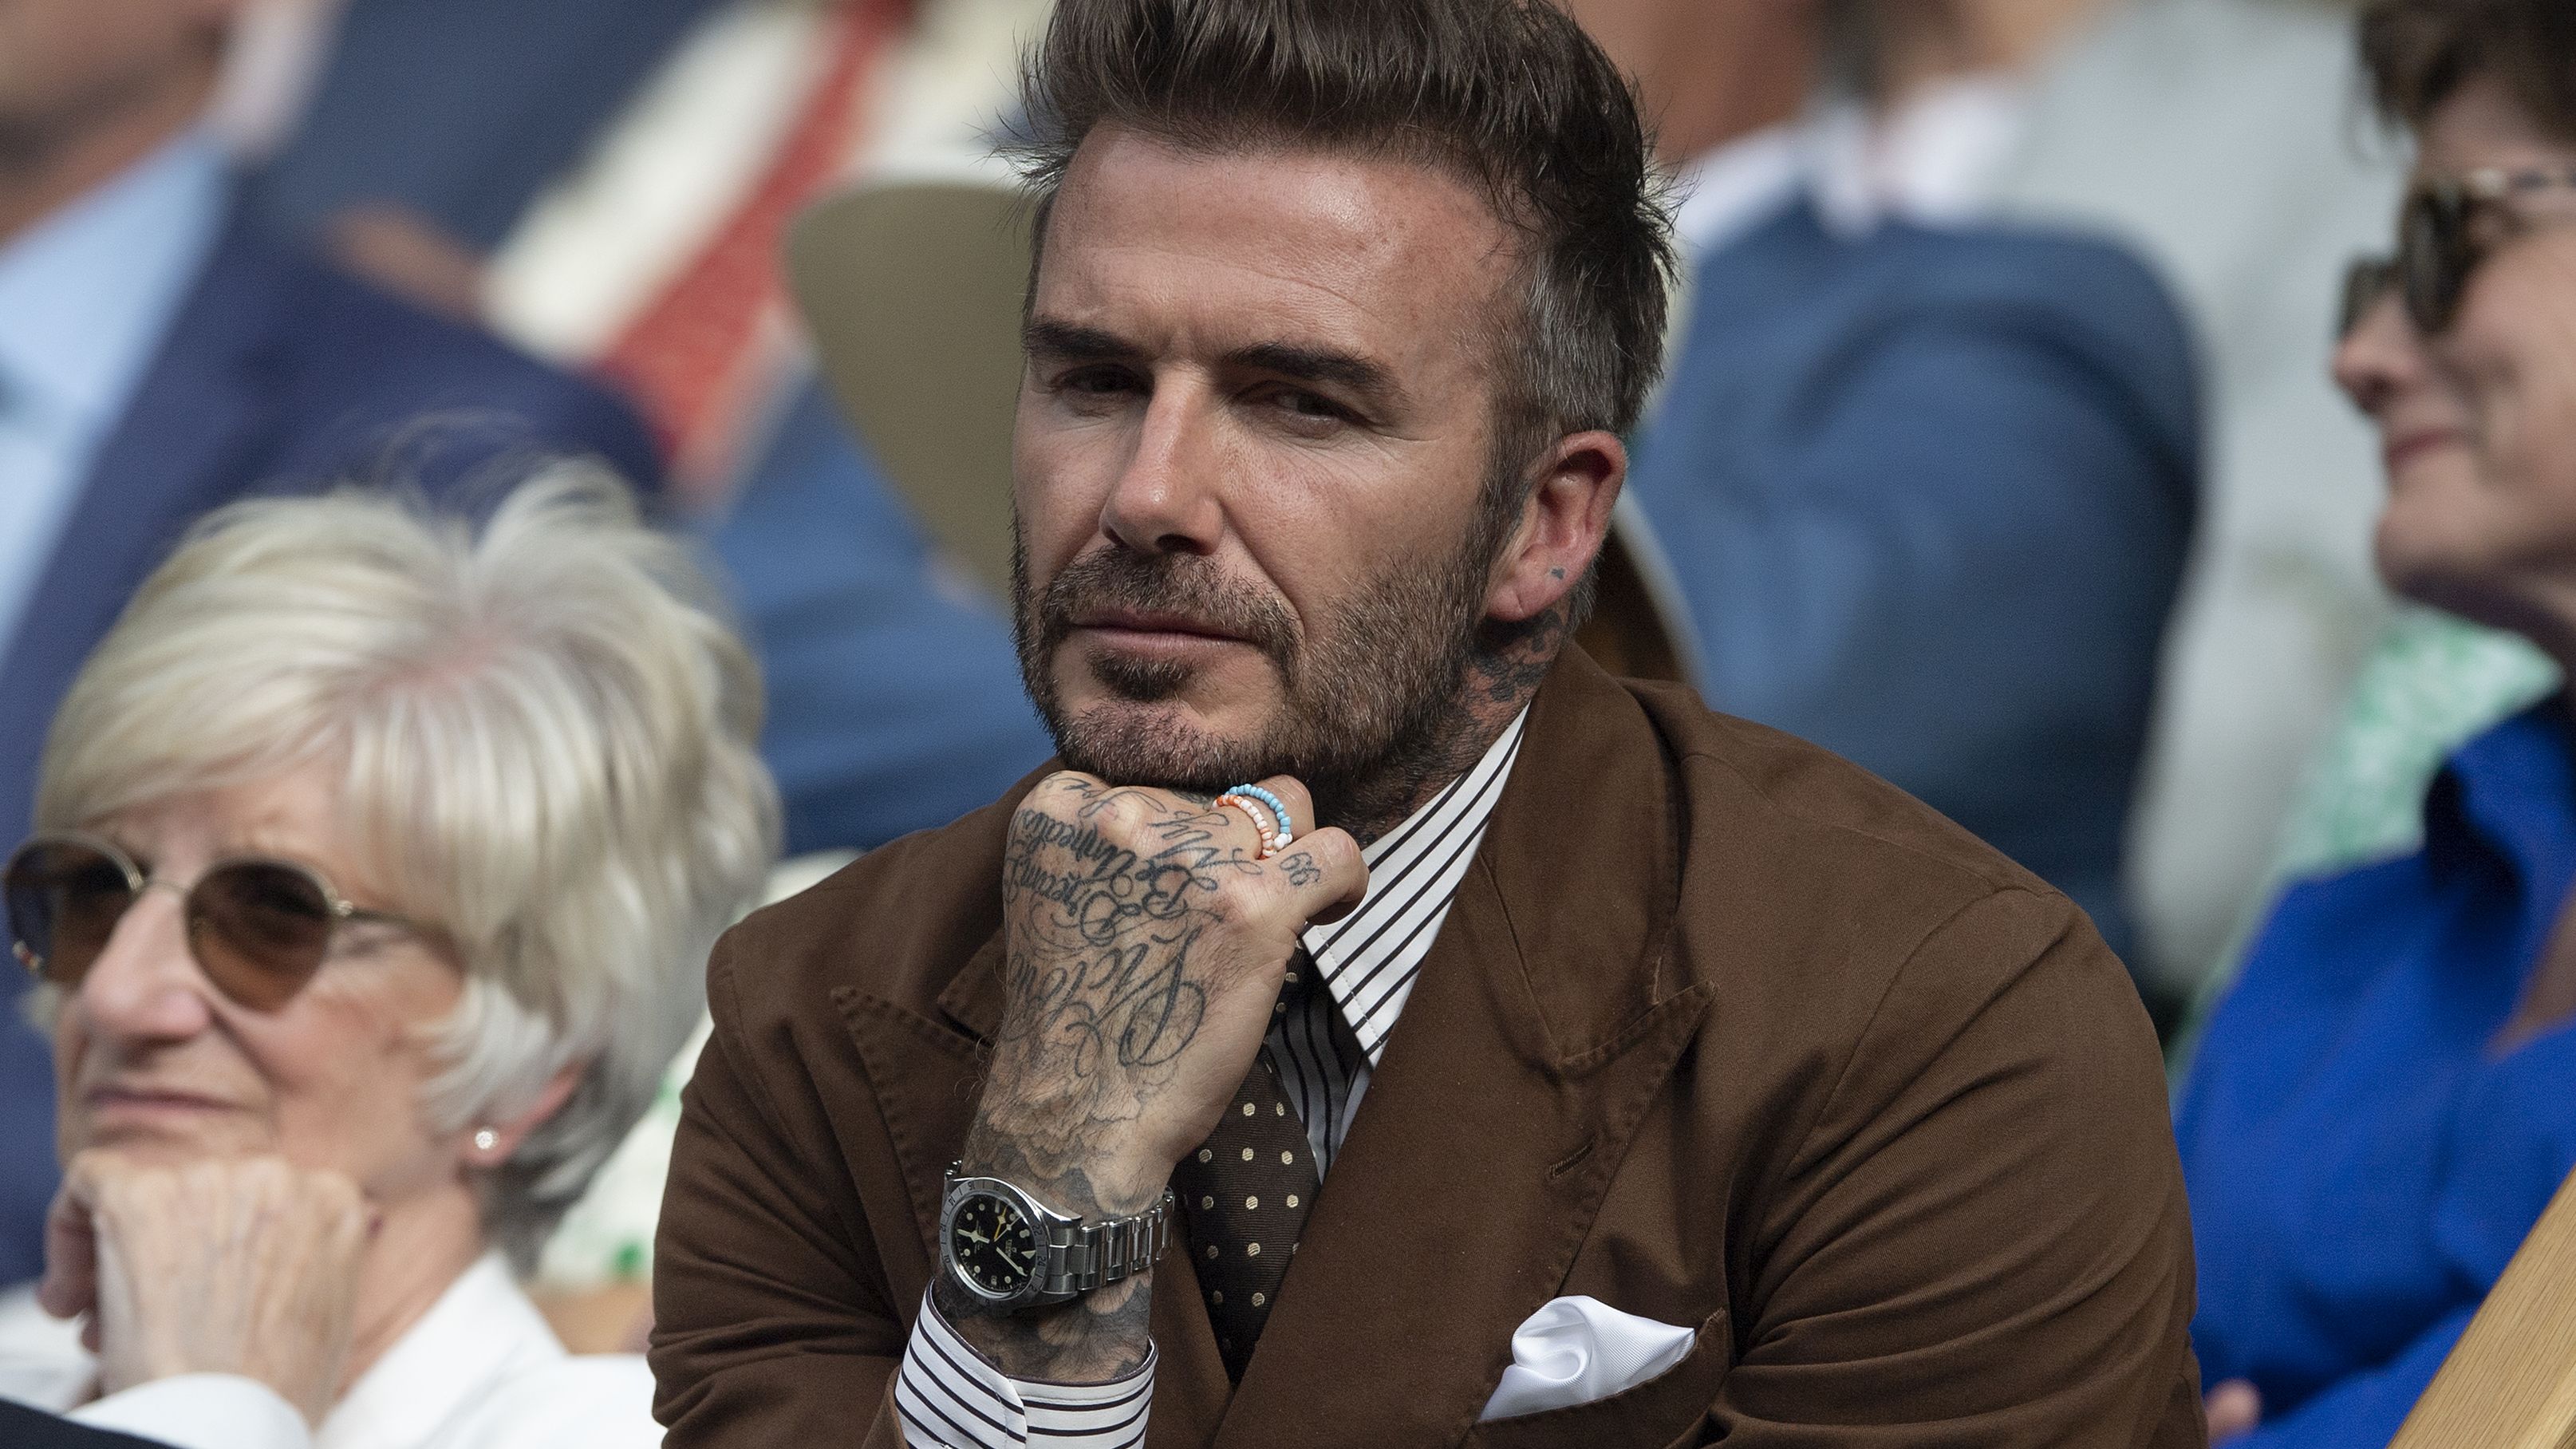 EXCLUSIVE: David Beckham's hard won reputation 'shredded' by one 'disgraceful' decision